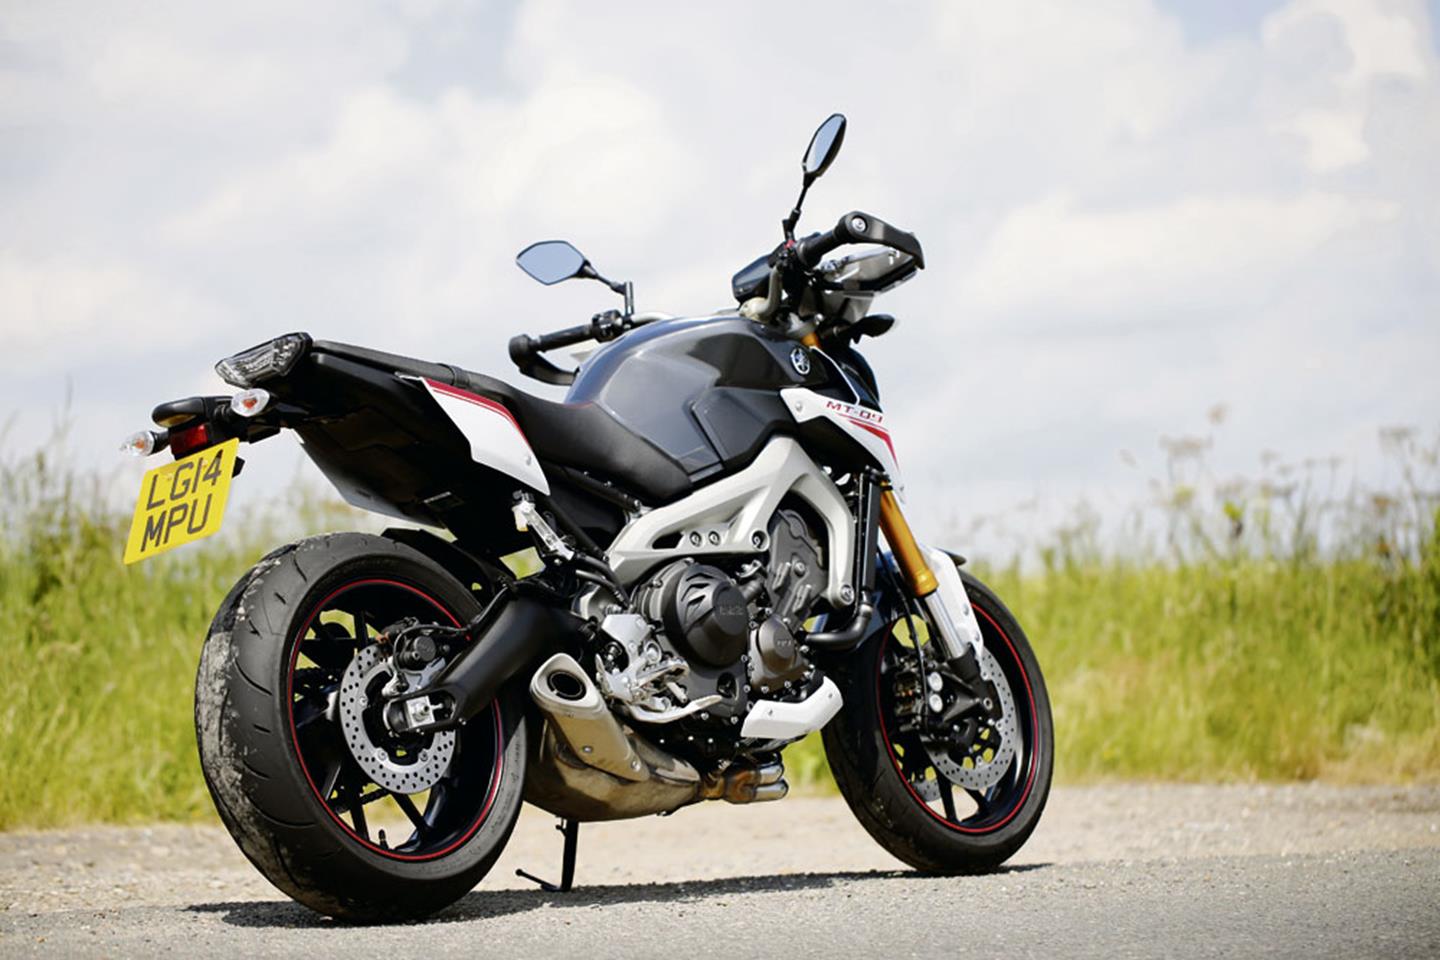 YAMAHA MT-09 SR (2014-2020) Review | Speed, Specs & Prices